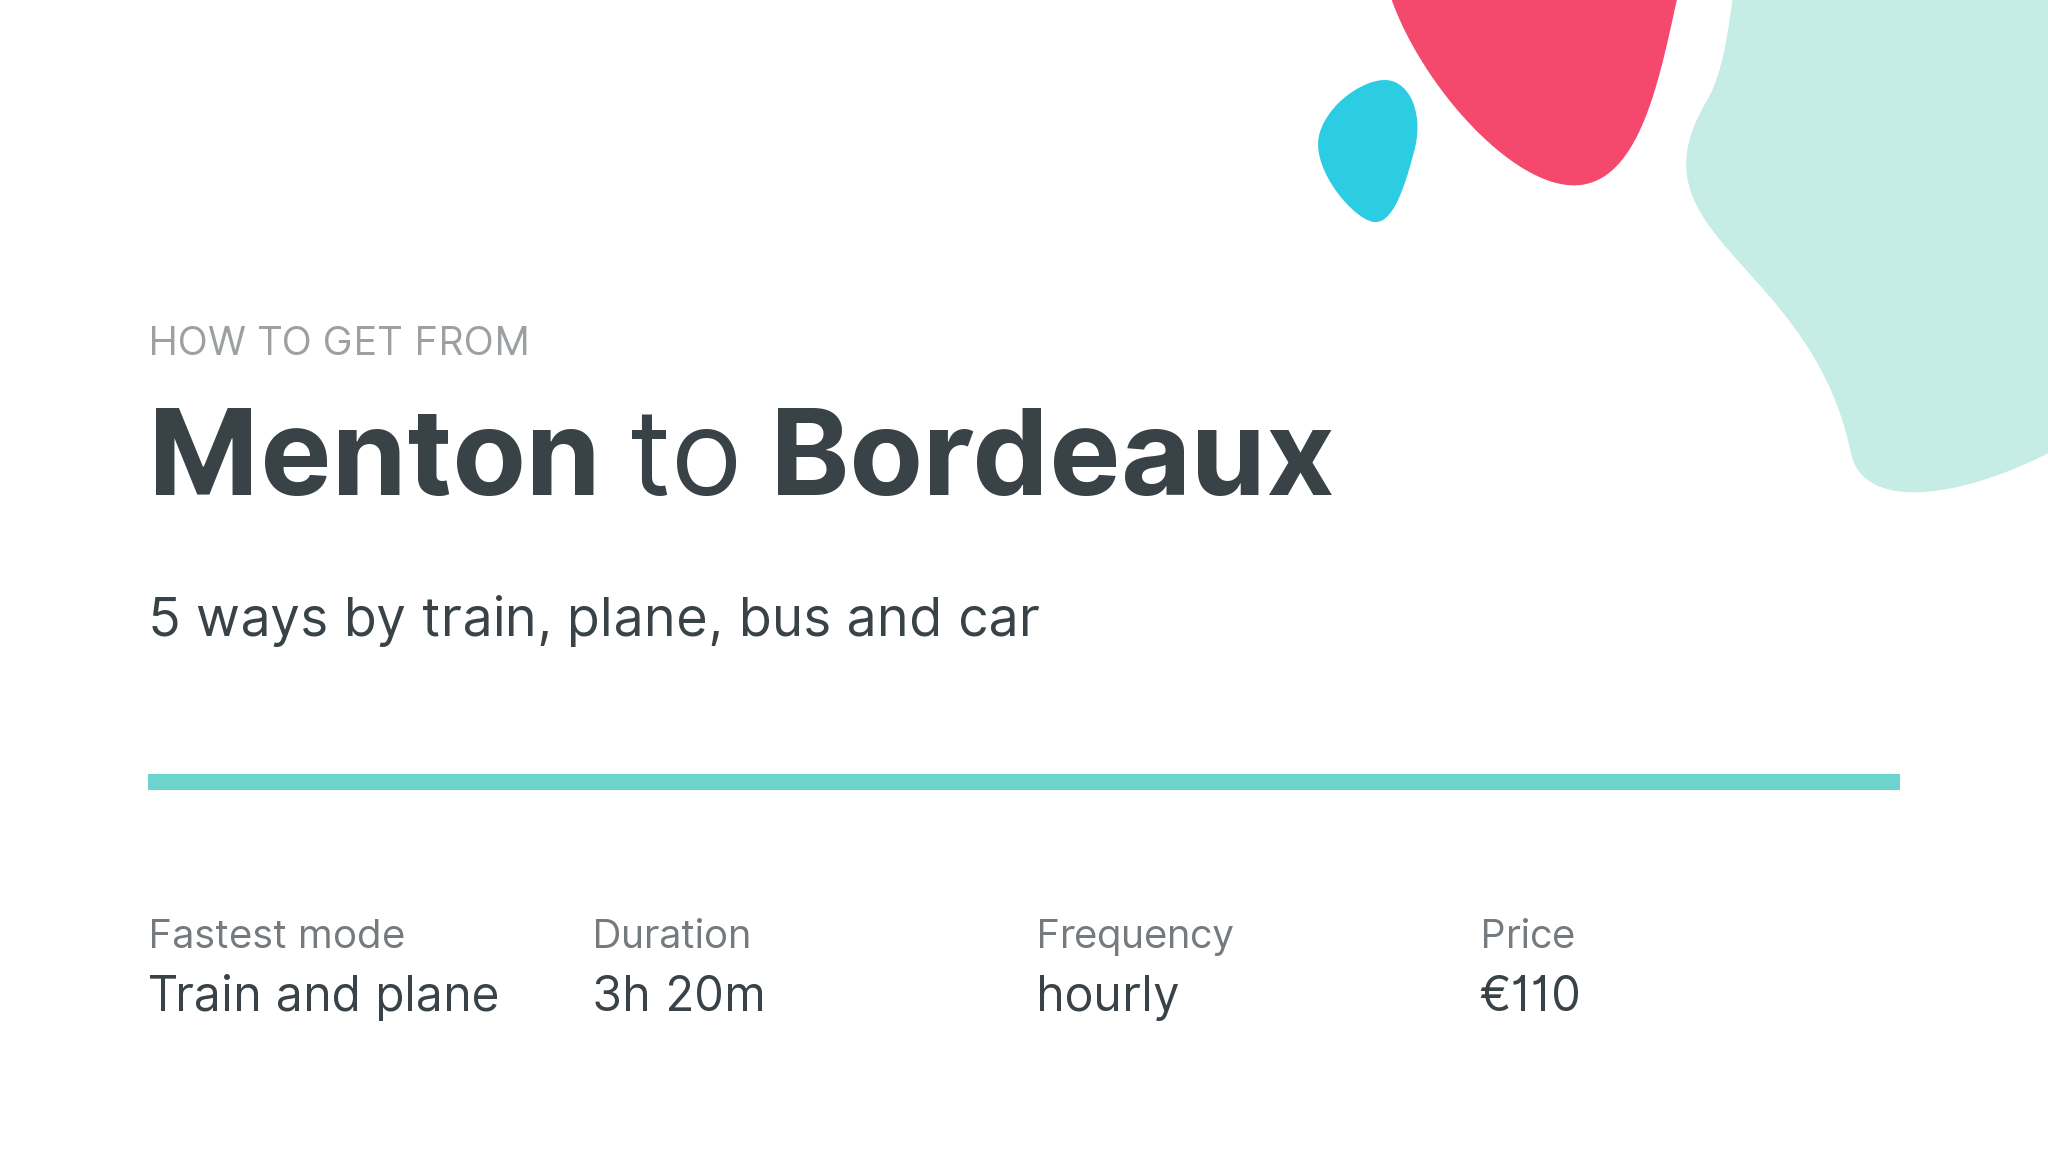 How do I get from Menton to Bordeaux